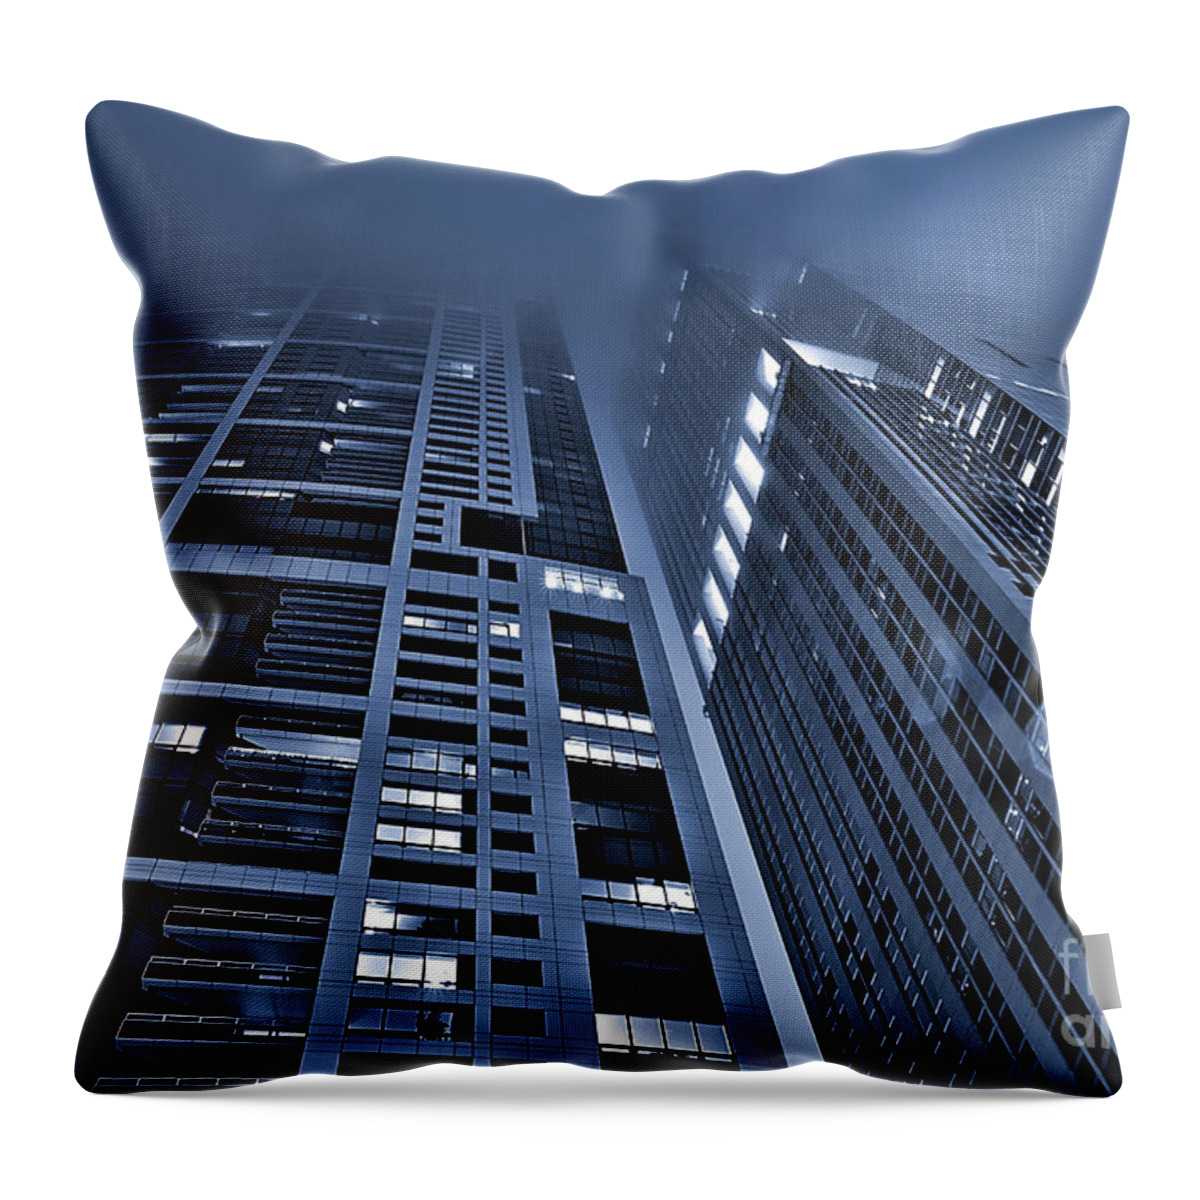 Chicago Skyscrapers In Fog. Throw Pillow featuring the photograph Monoliths by Brett Maniscalco